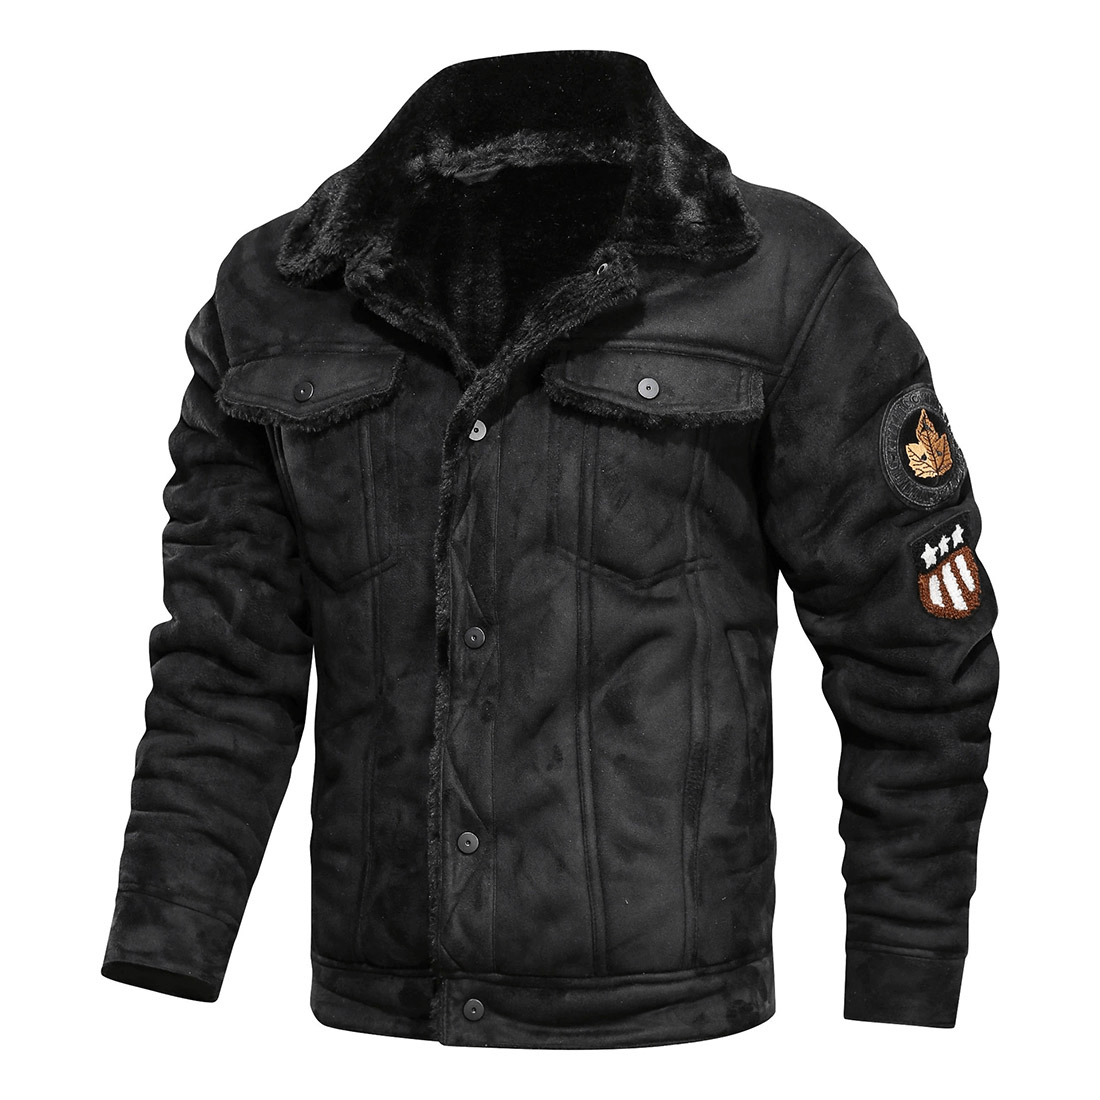 Motorcycle Cashmere Jacket Without a Hood / Casual Buttons Pockets Warm Jackets